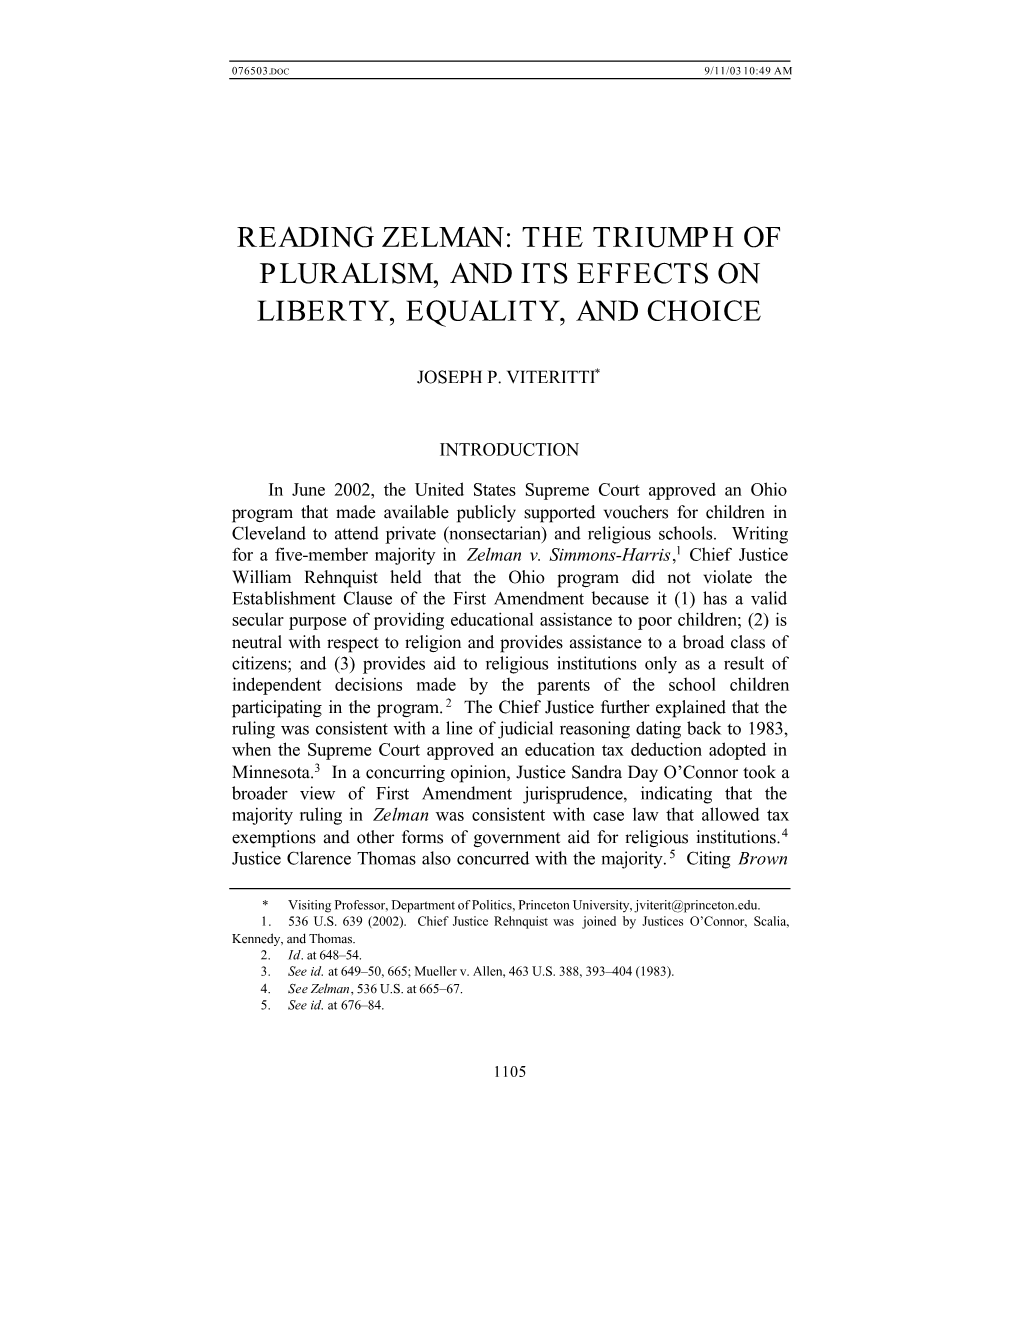 Reading Zelman: the Triumph of Pluralism, and Its Effects on Liberty, Equality, and Choice